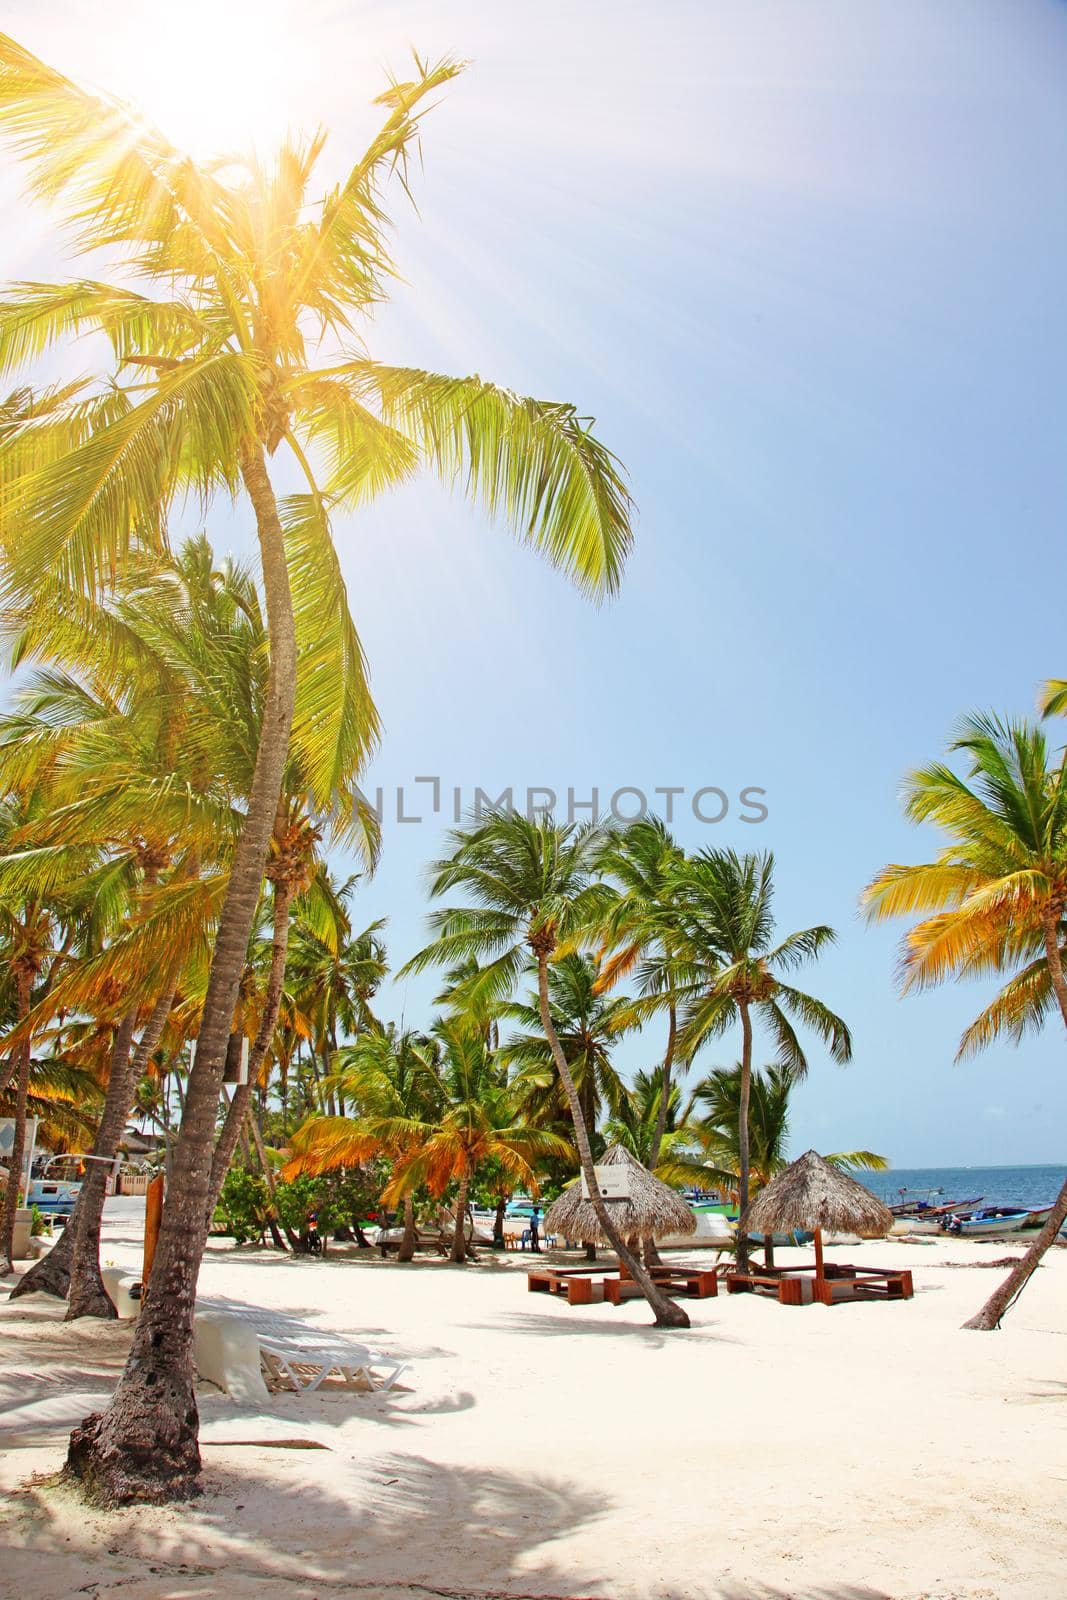 Beach with white sand, sun and quiet ocean. Tropical banner. by Taut